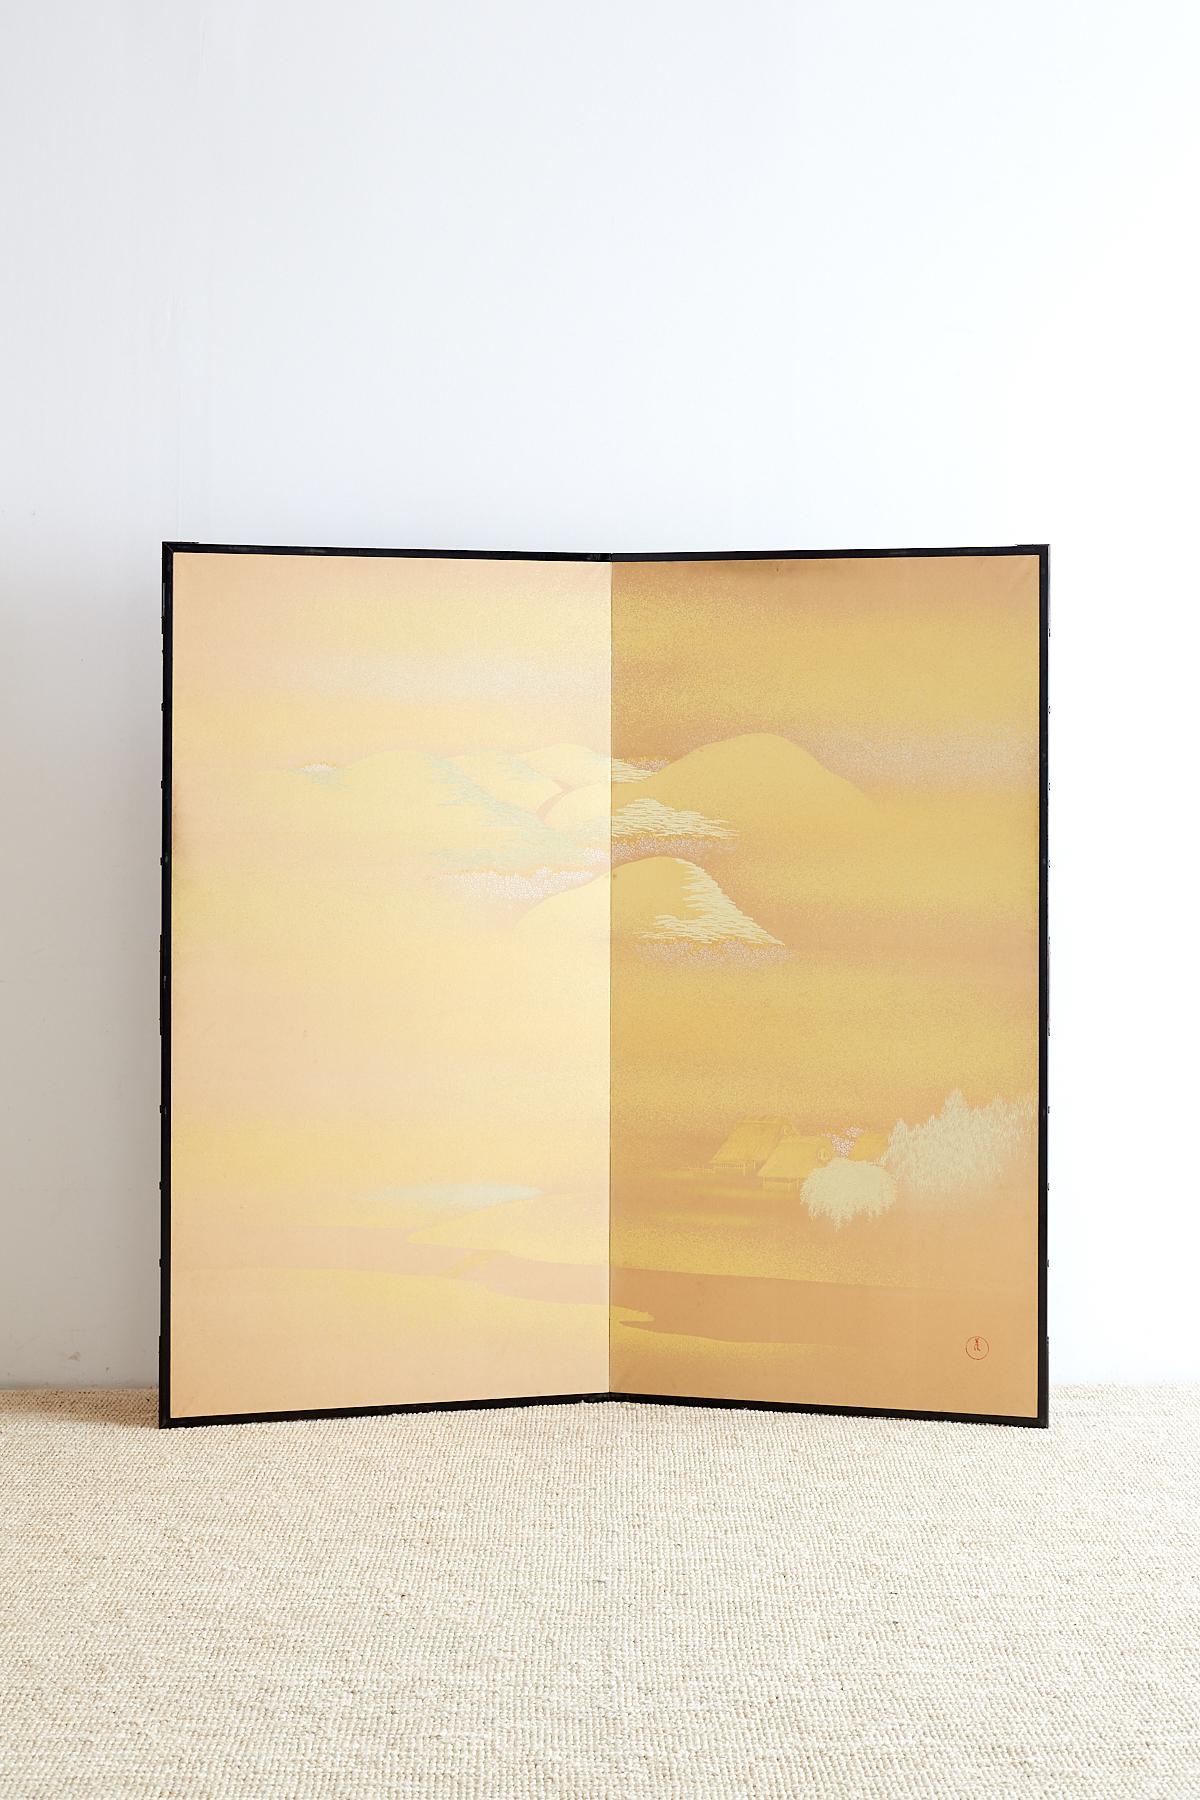 Chinese Japanese Two-Panel Gold Leaf Screen by Yoshikawa For Sale